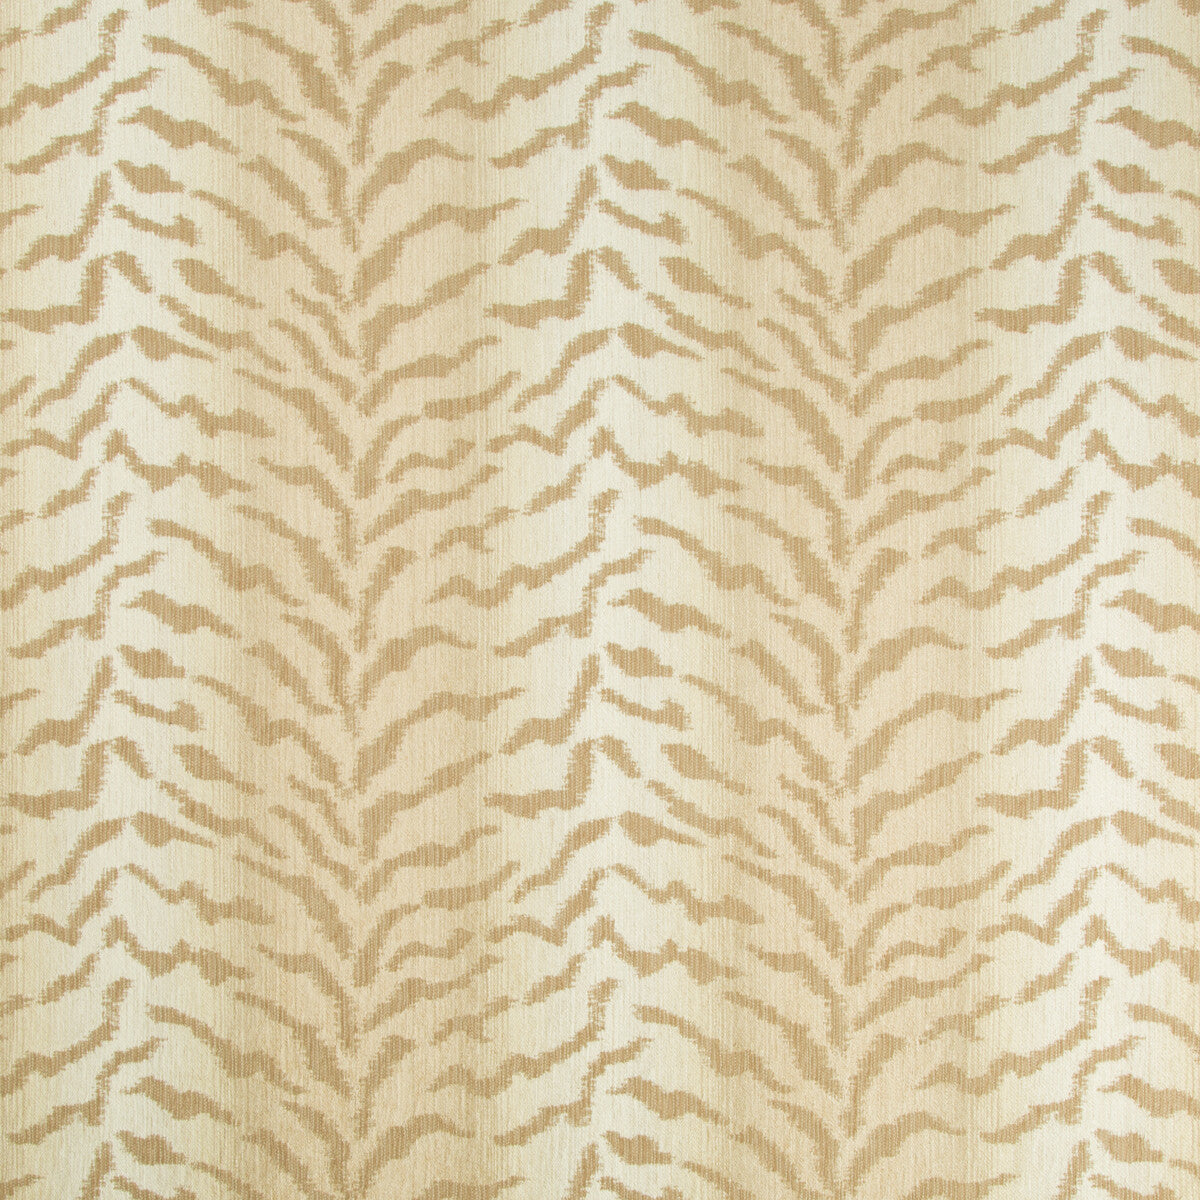 Kravet Design fabric in 35010-16 color - pattern 35010.16.0 - by Kravet Design in the Performance Crypton Home collection